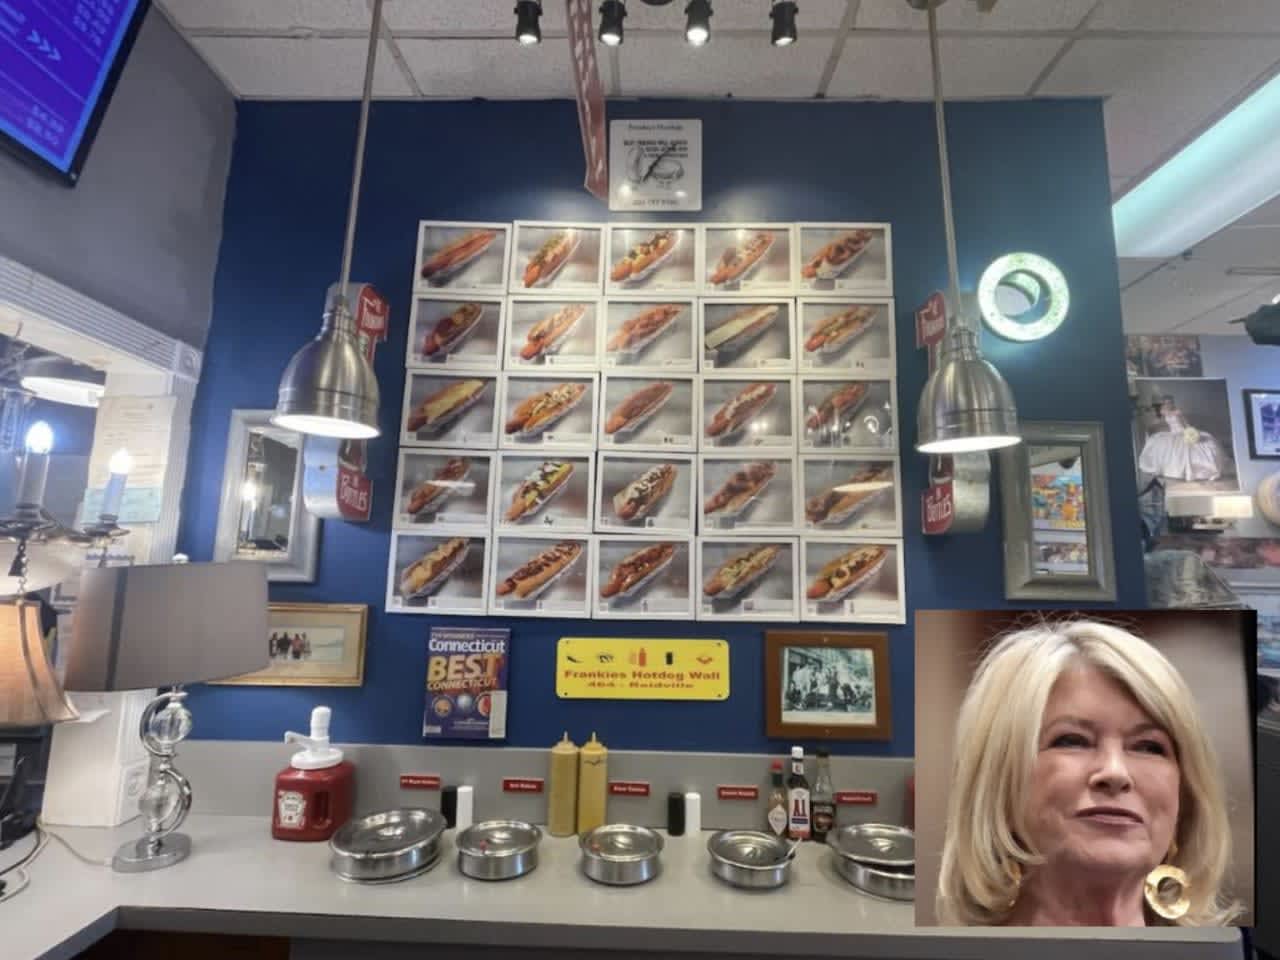 The 'Hot Dog' wall at Frankie's Family Restaurant visited by Martha Stewart.